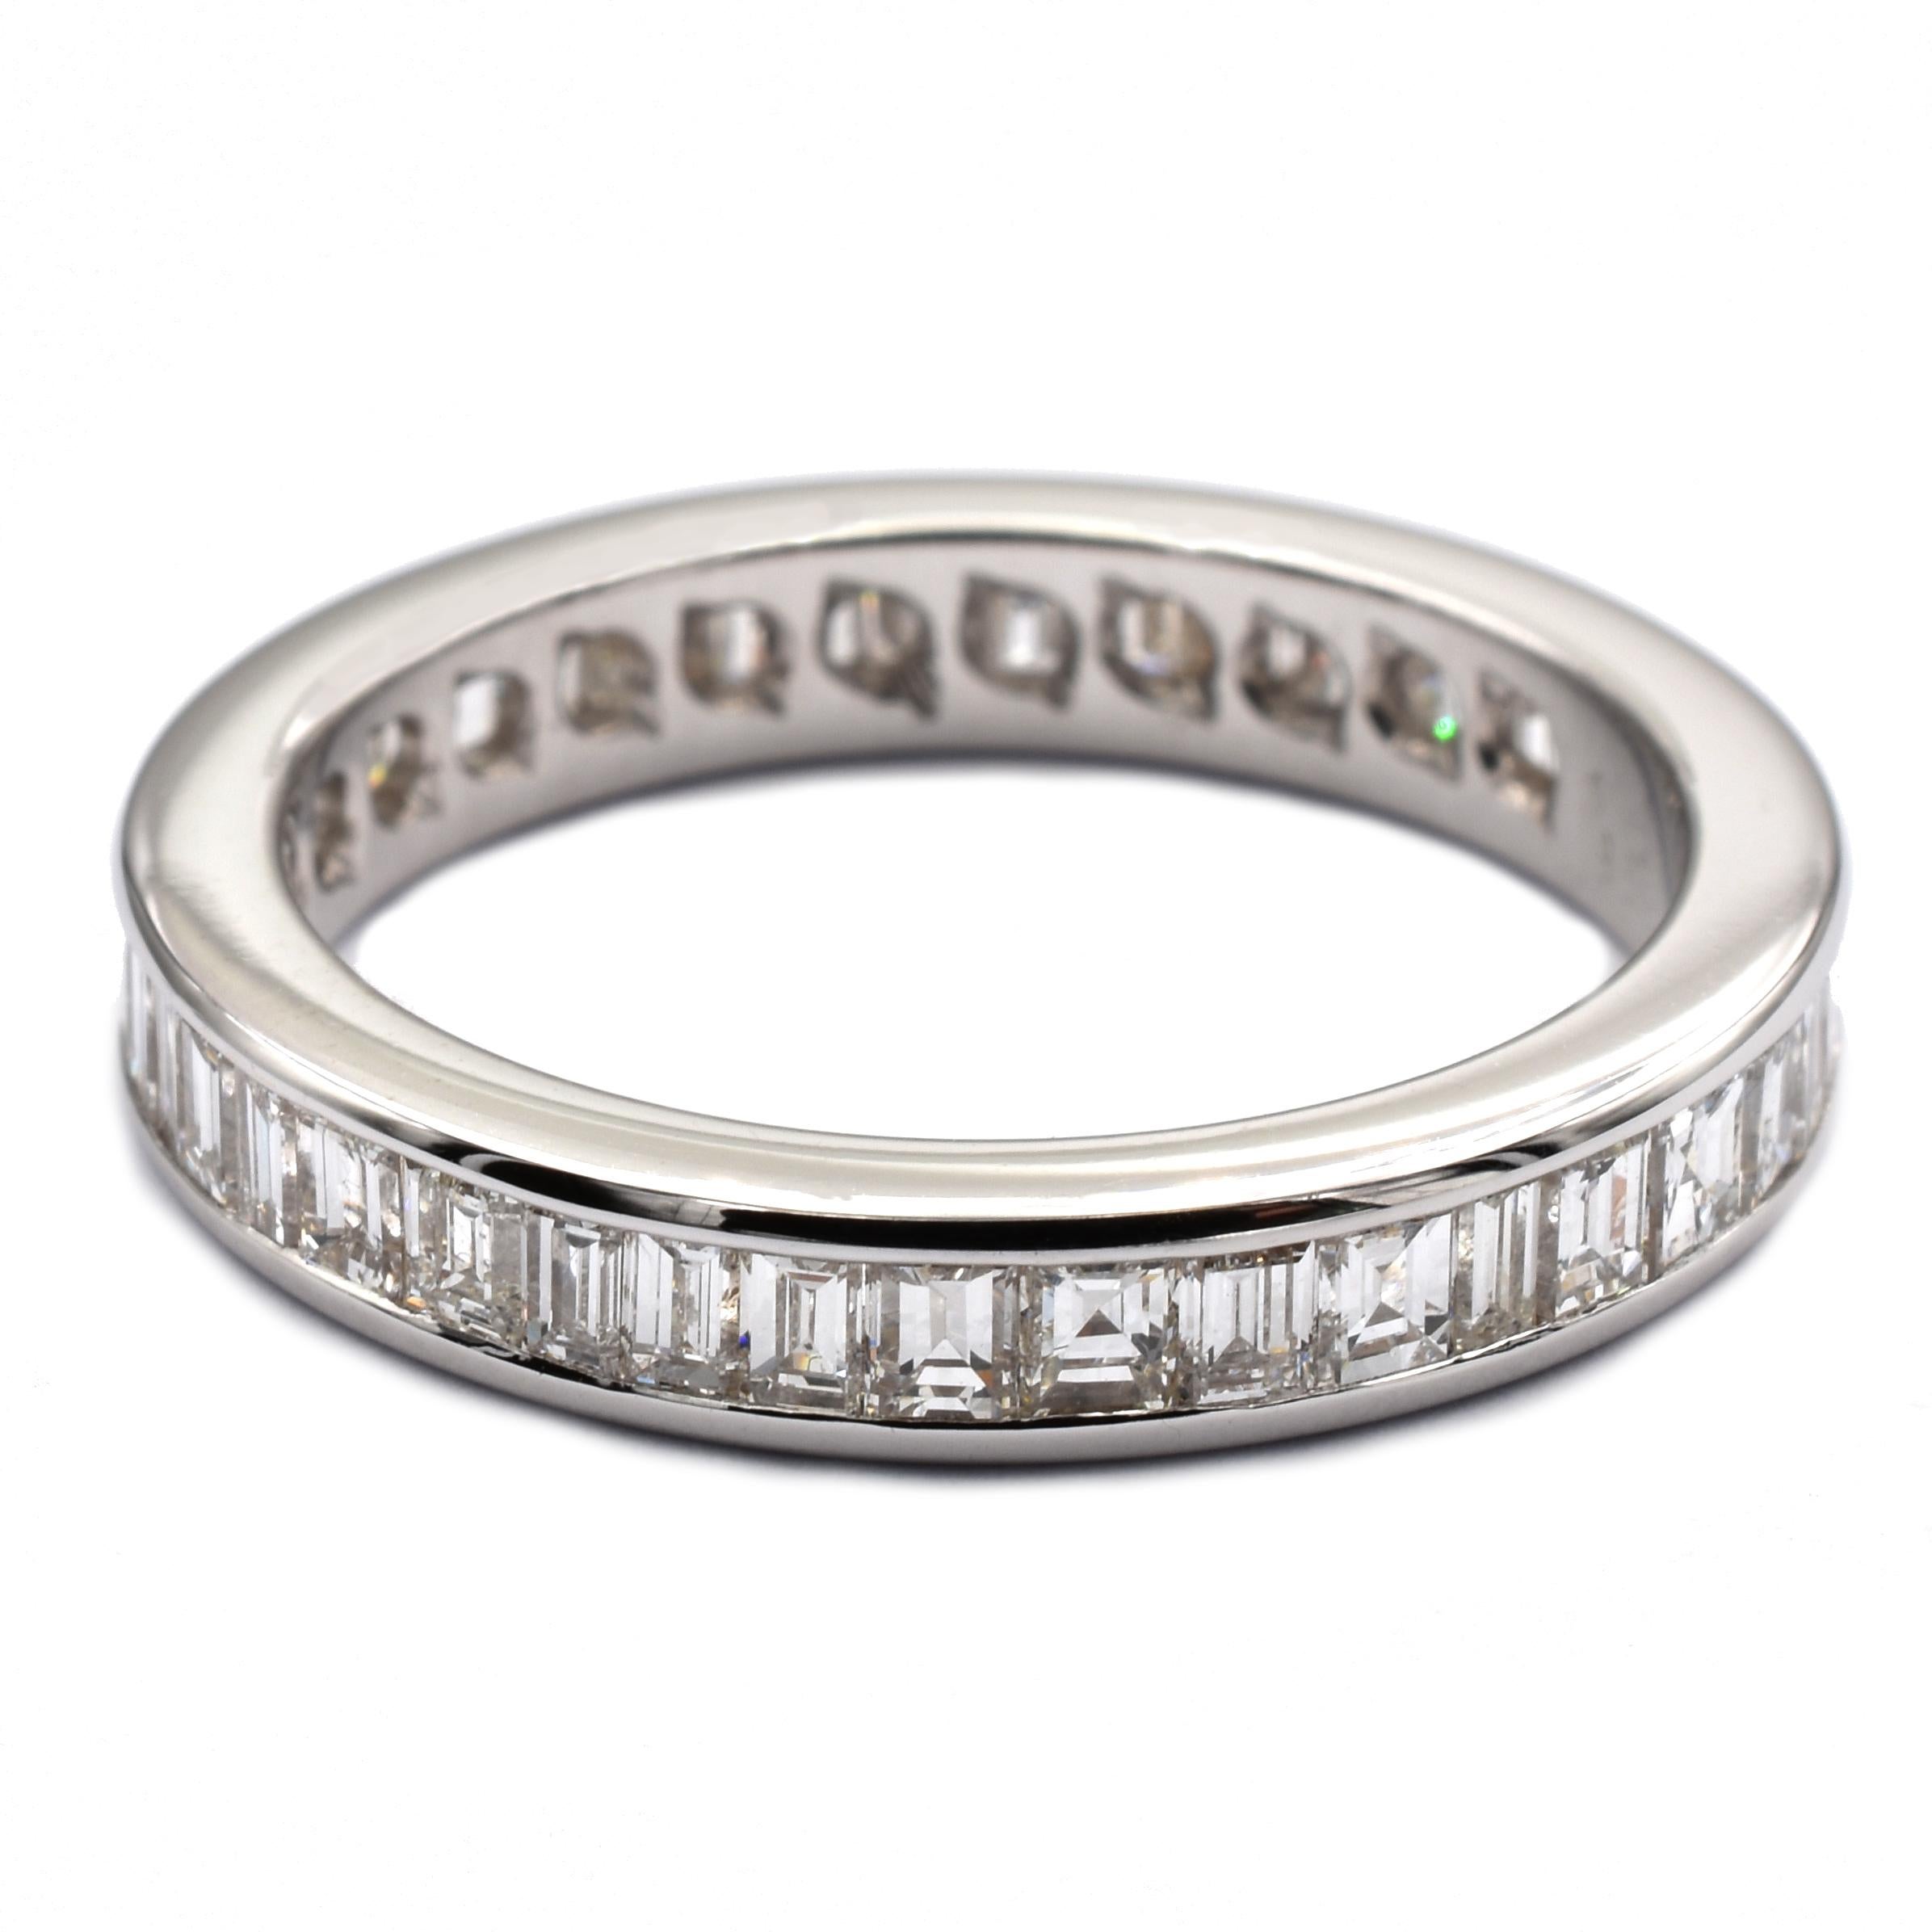 Gilberto Cassola 18Kt White Gold Eternity Ring with Baguette Diamonds.
Handmade in Italy in Our Athelier in Valenza (AL).
18Kt Gold g 4,15
F Color VVS Clarity Baguette Cut Diamonds Total Weight ct 1.71
This Ring is a Regular Size 53 (EU) and can be